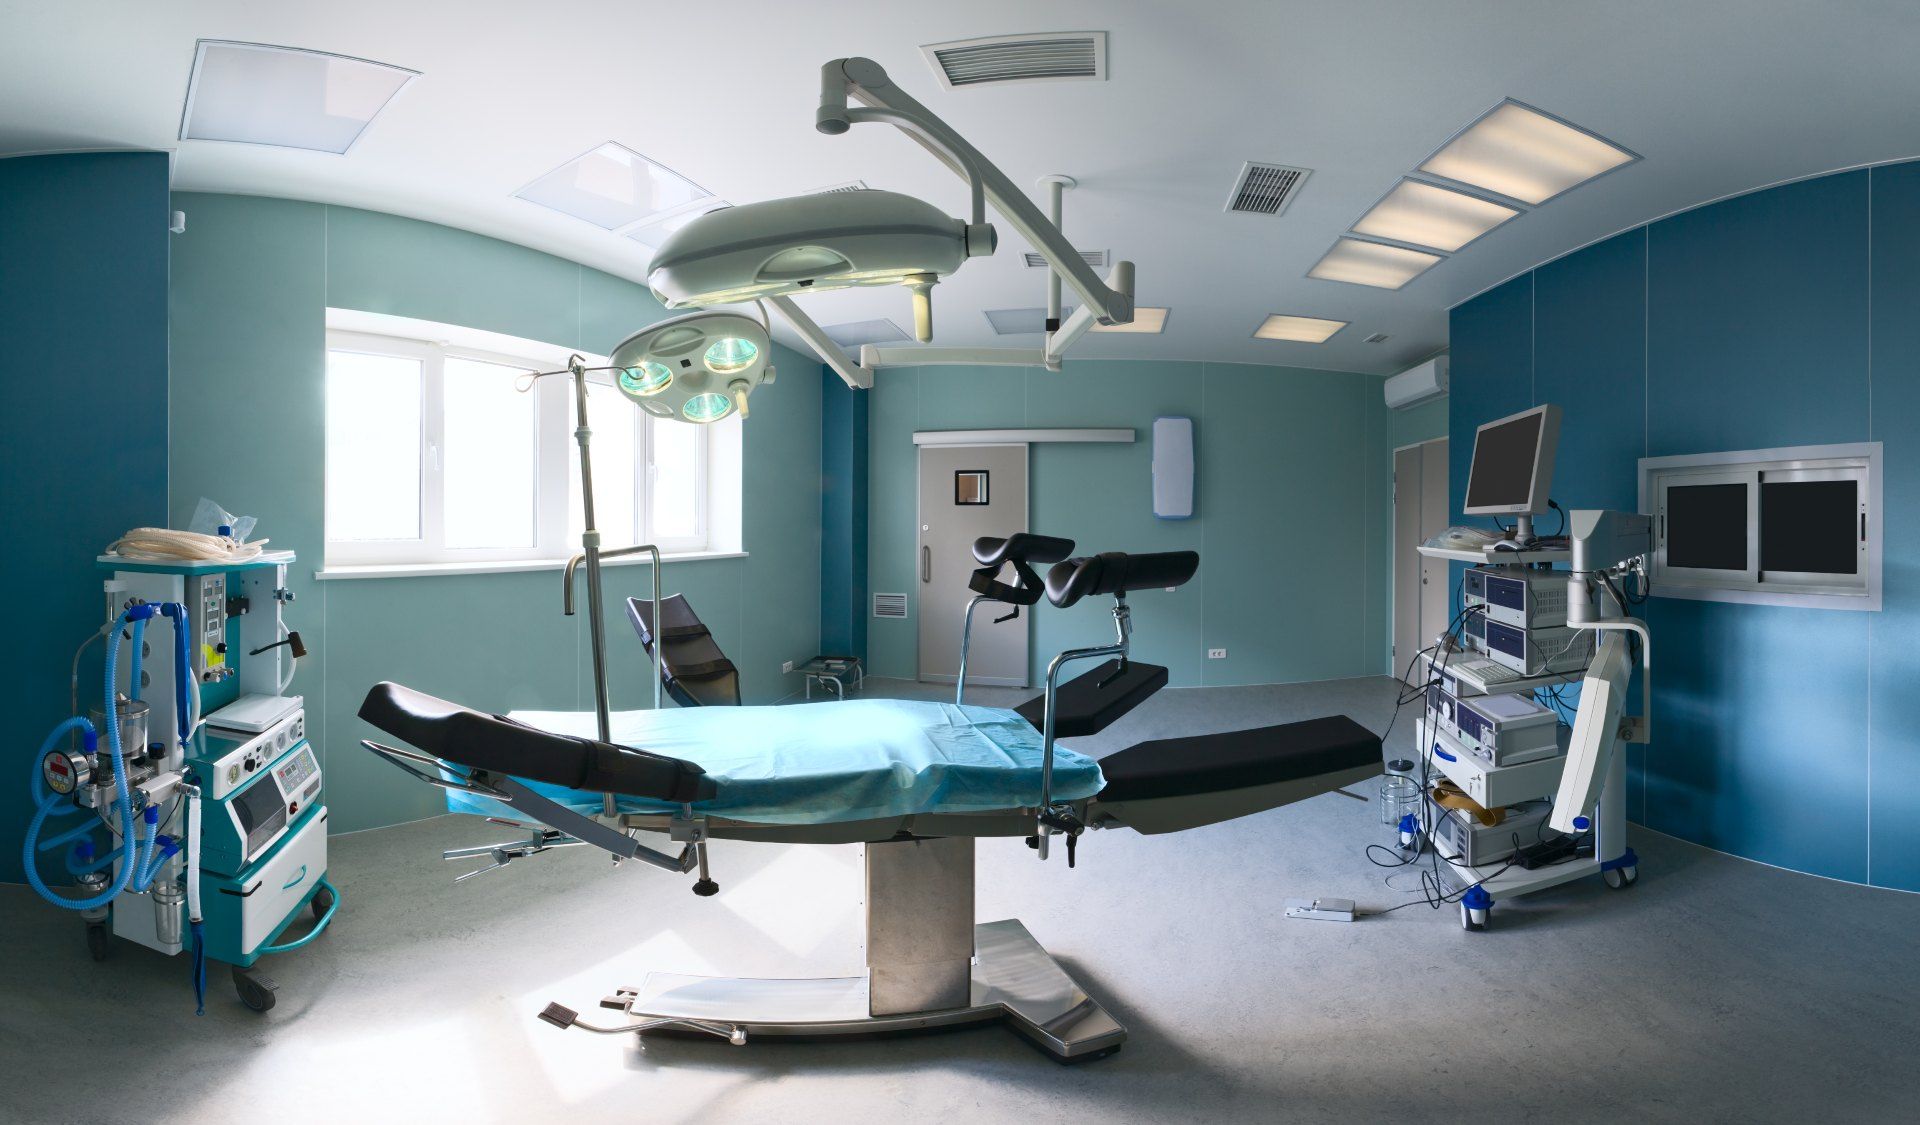 An operating room at a hospital - medical abuse